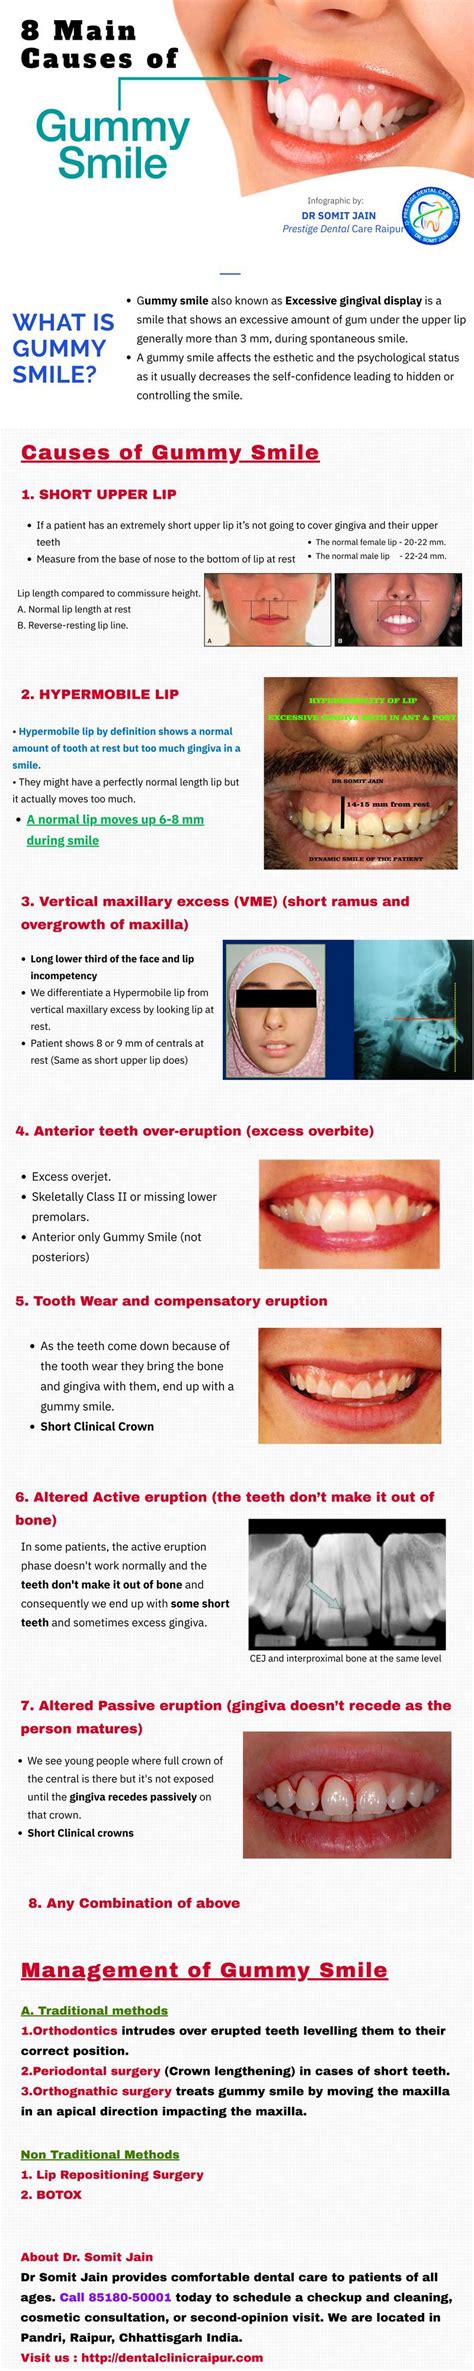 Gummy Smile Excessive Gingival Display Meaningcausestreatment